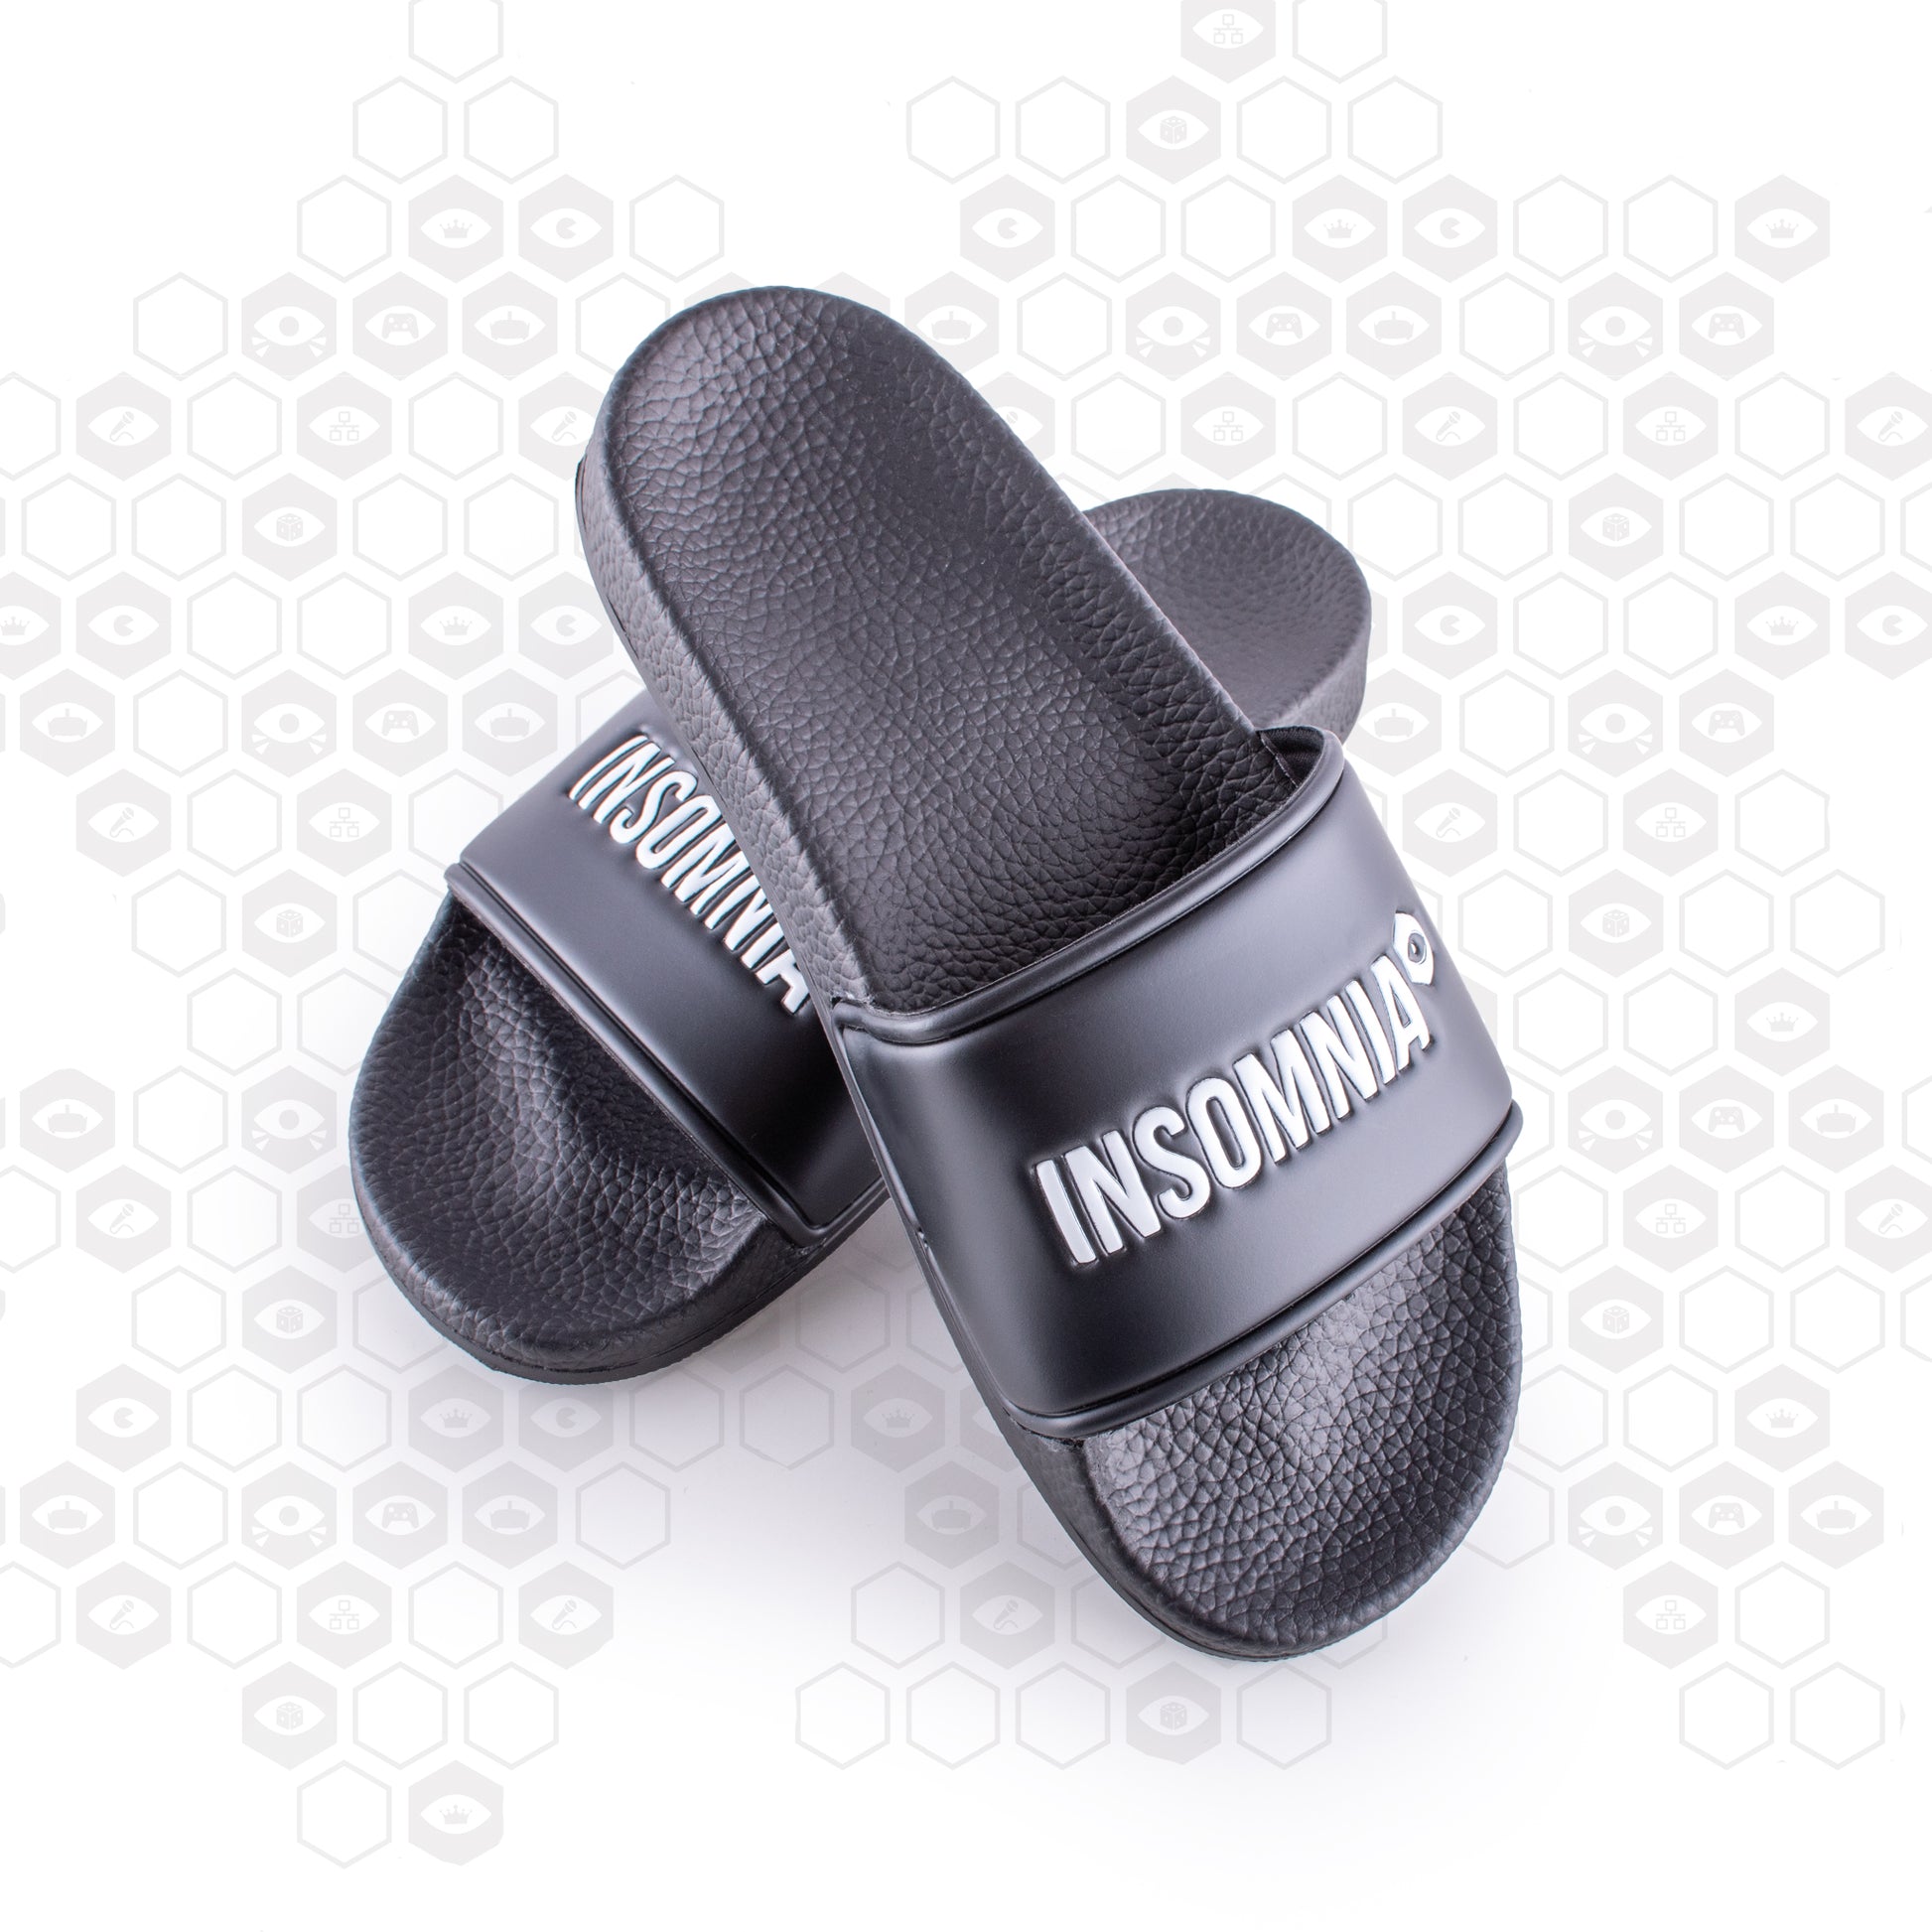 Black soft cushioned sliders with bandage style upper with insomnia logo in white